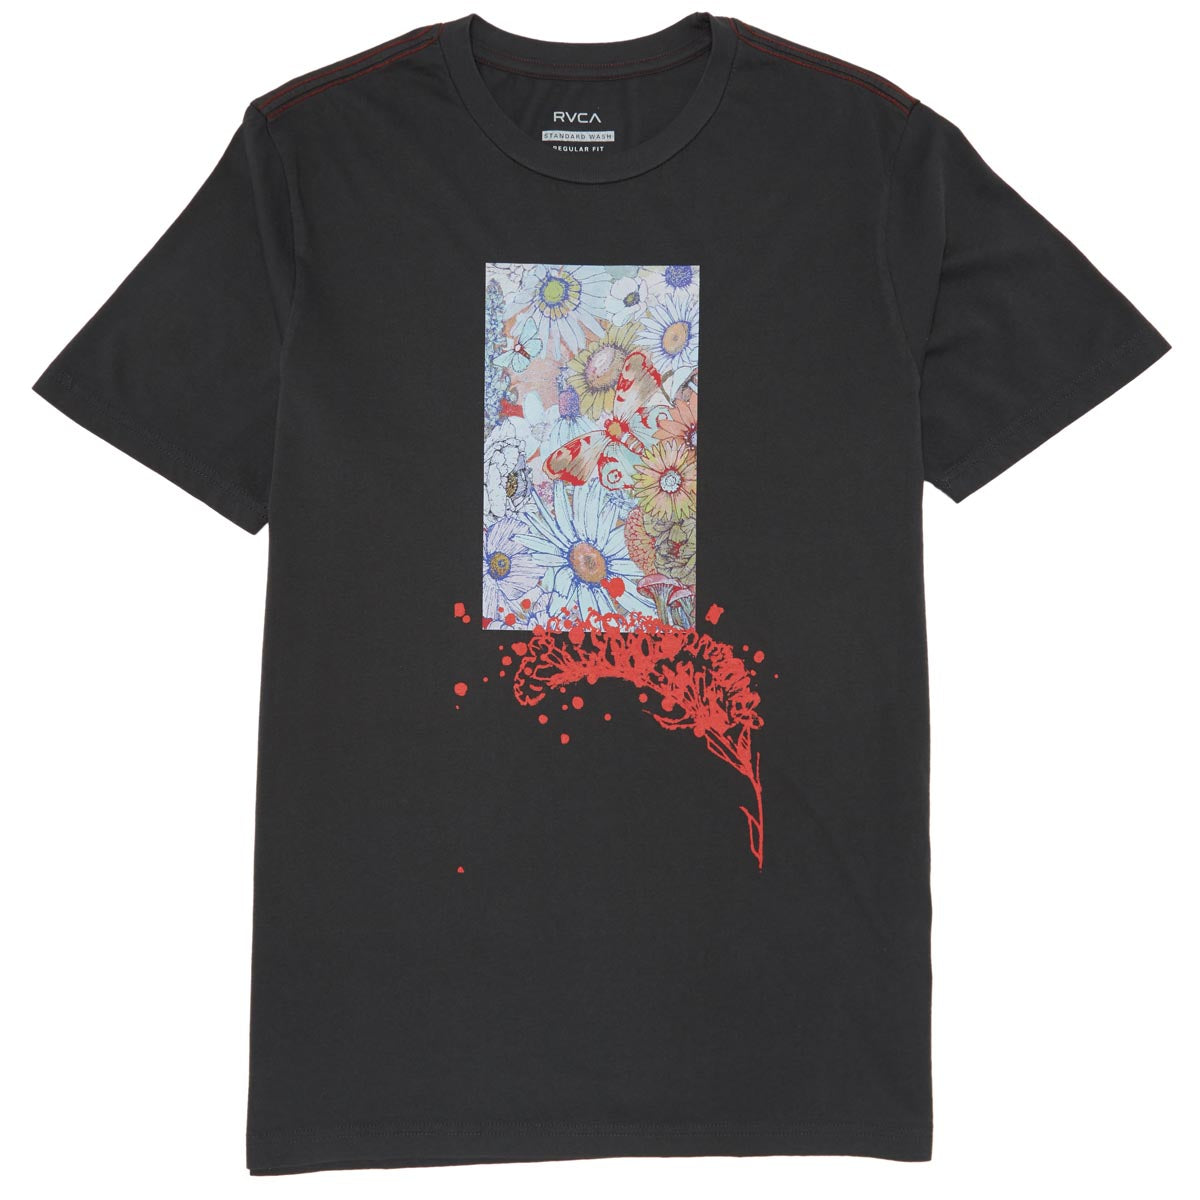 RVCA Cropped Flower T-Shirt - Pirate Black image 1